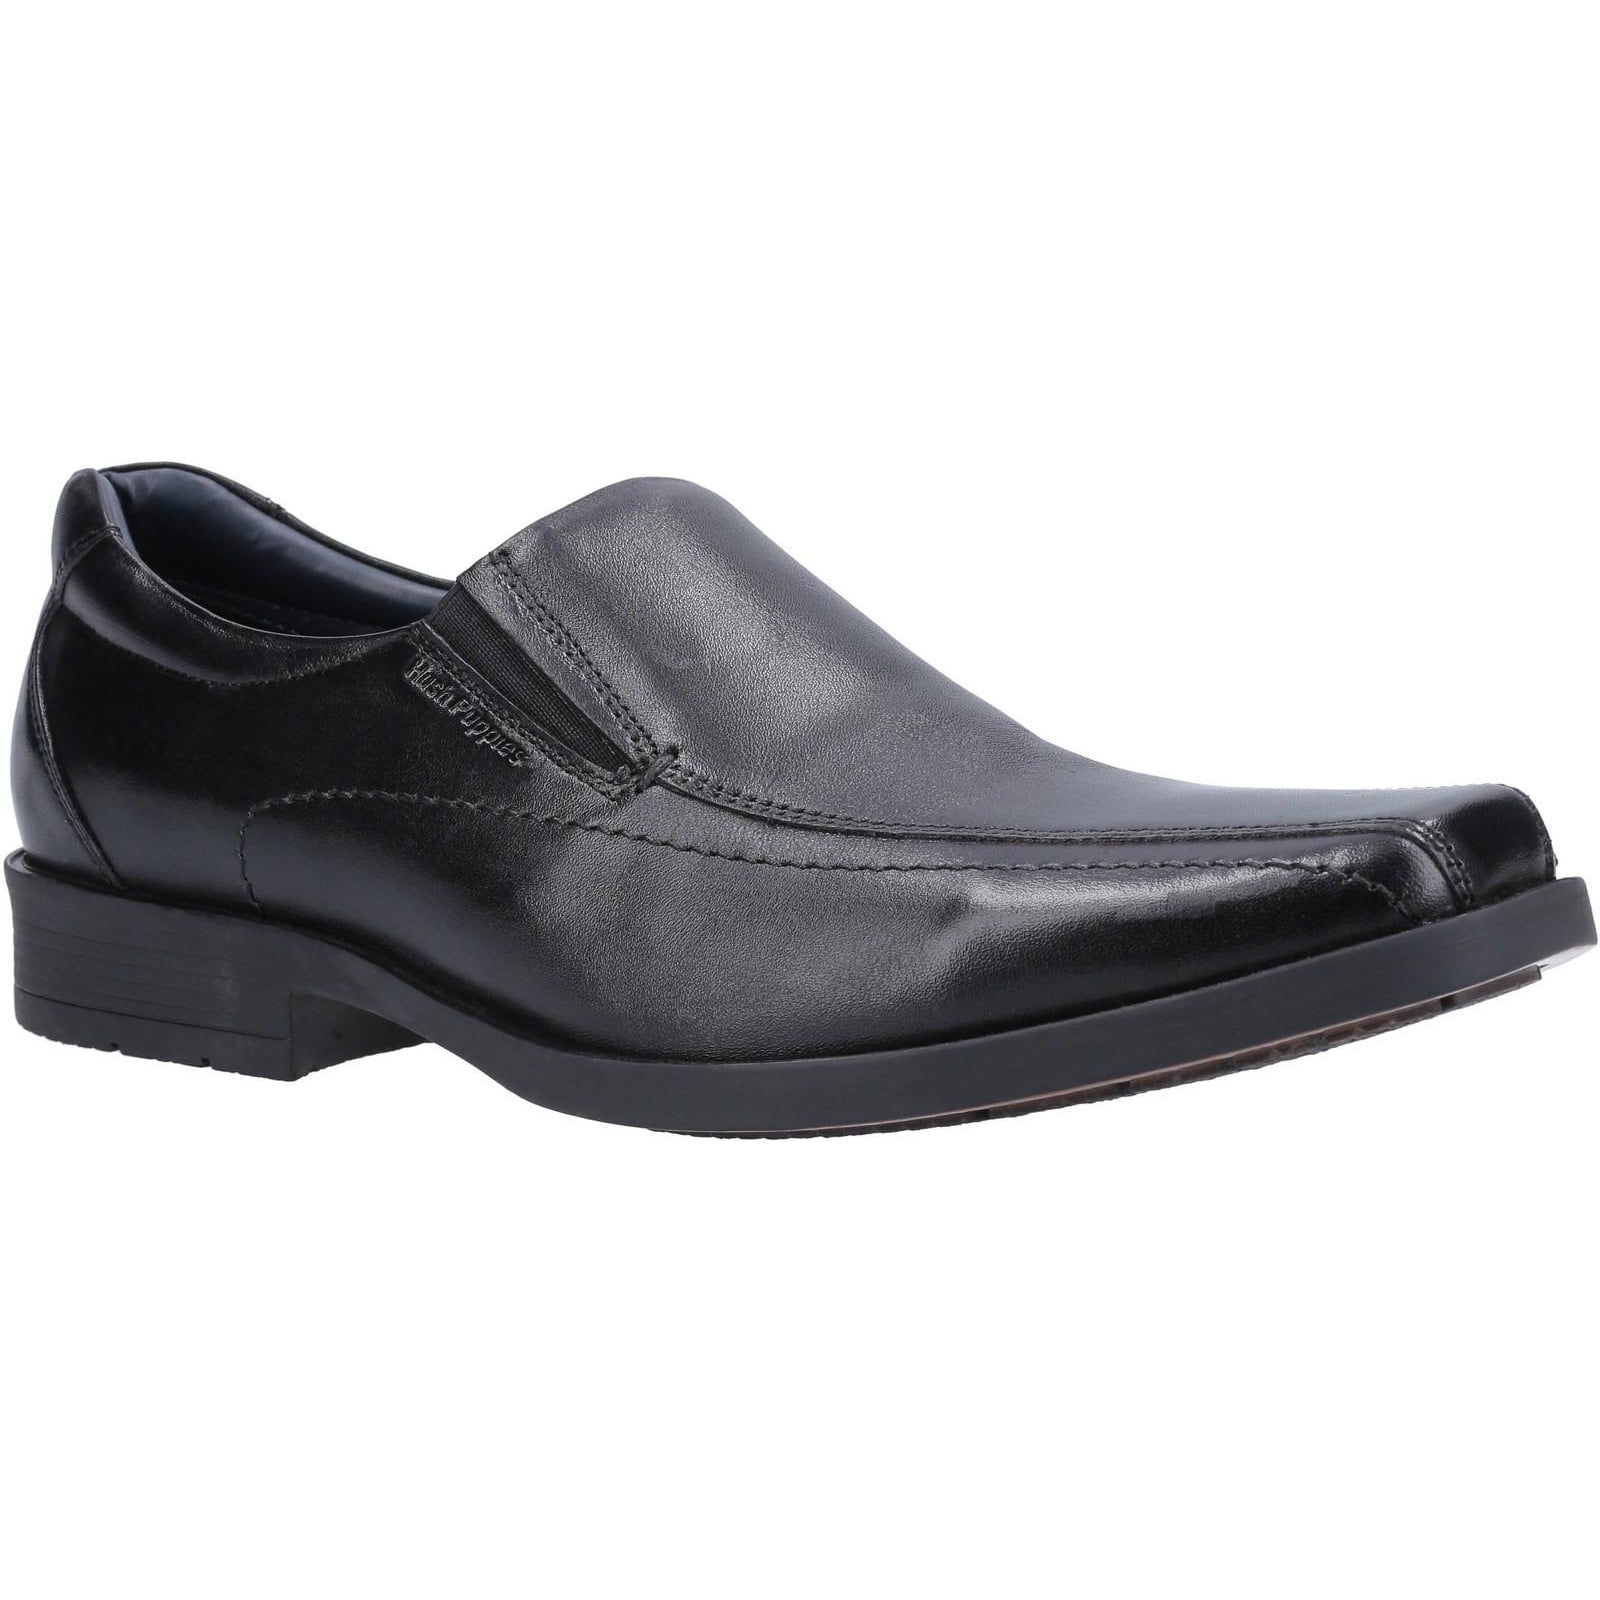 Hush Puppies Boys Brody Leather Shoes - Walmart.com